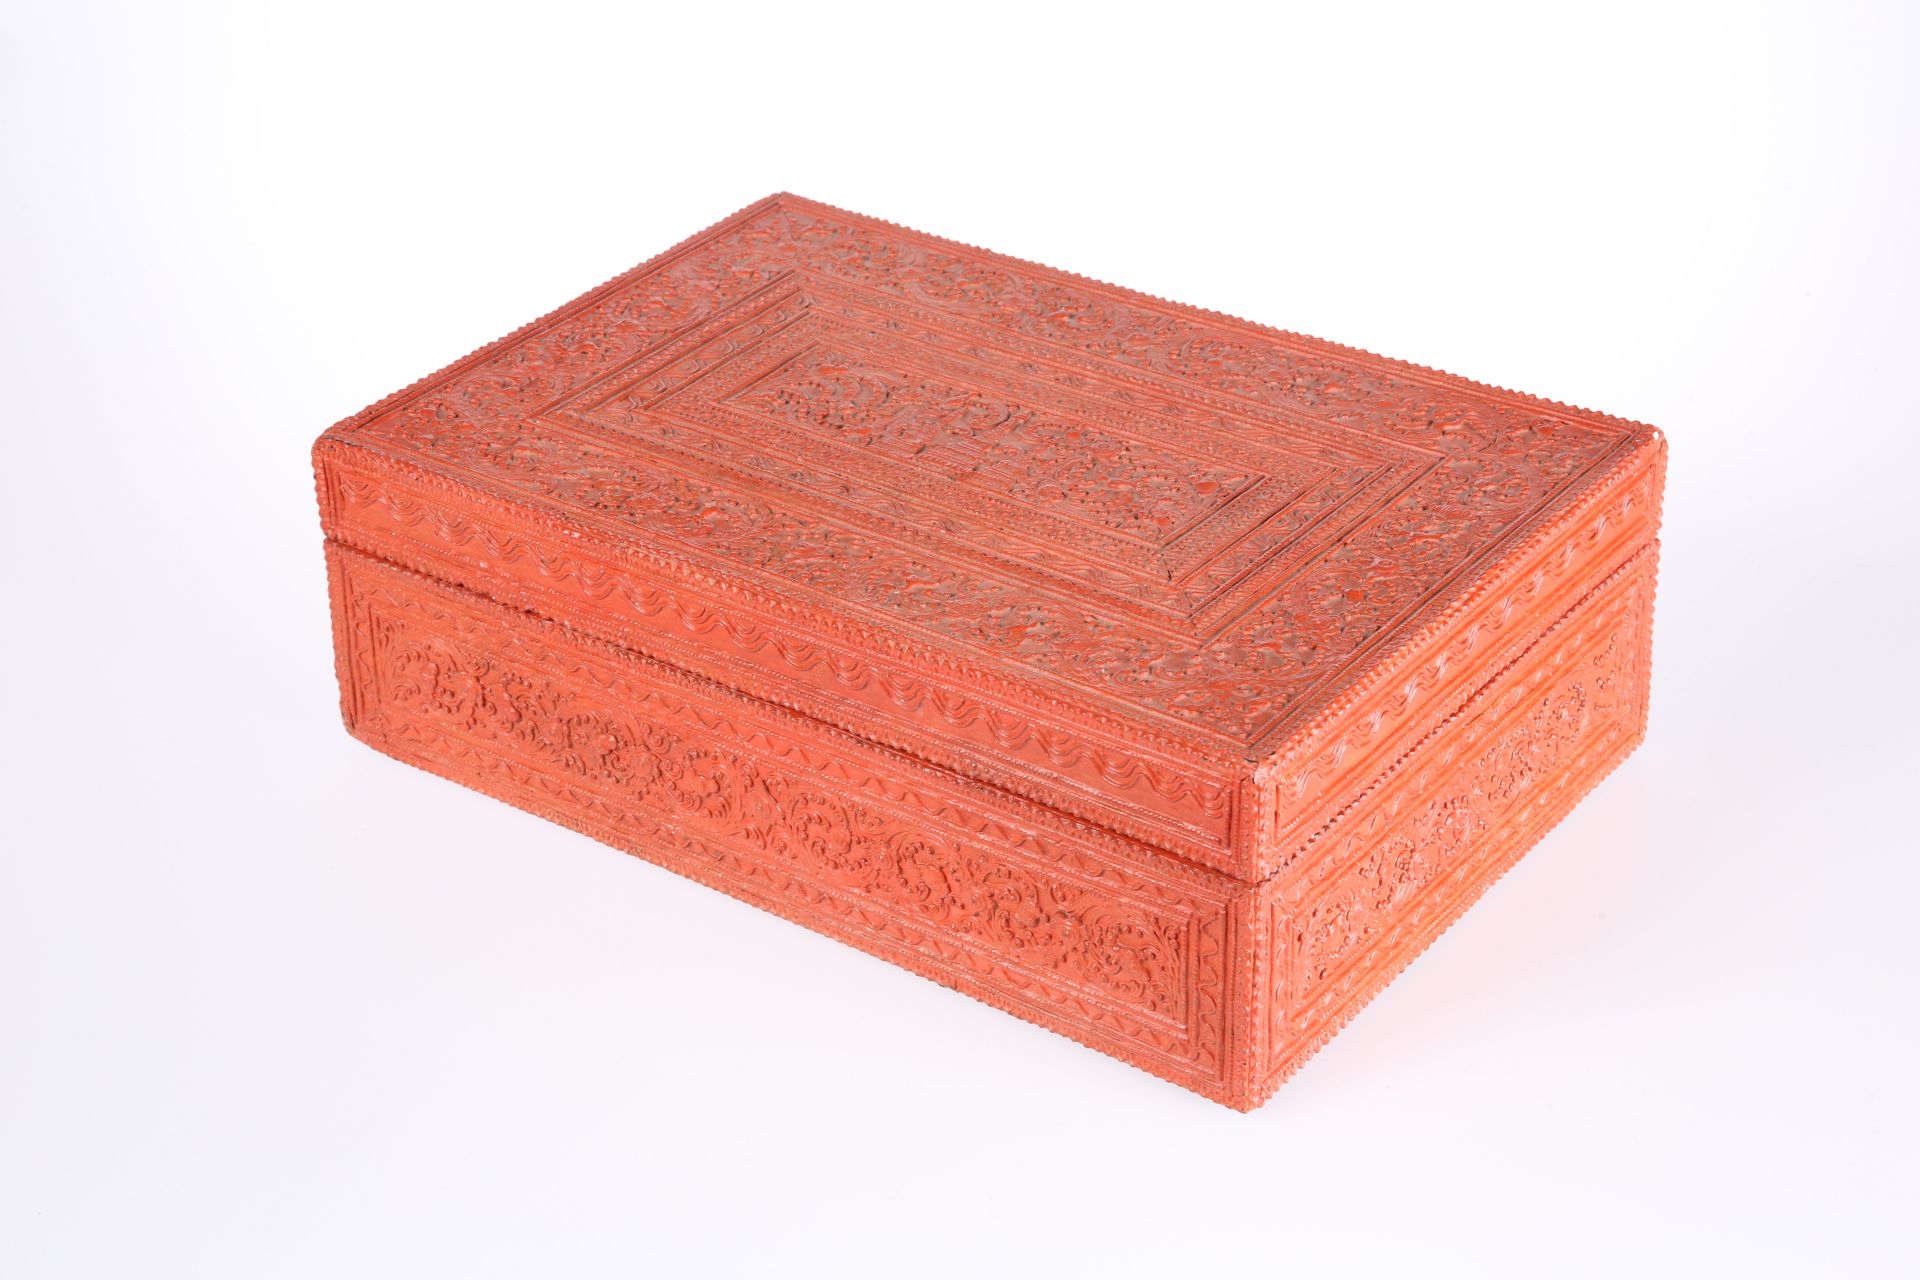 A SOUTH-EAST ASIAN RED LACQUER BOX, 19TH CENTURY